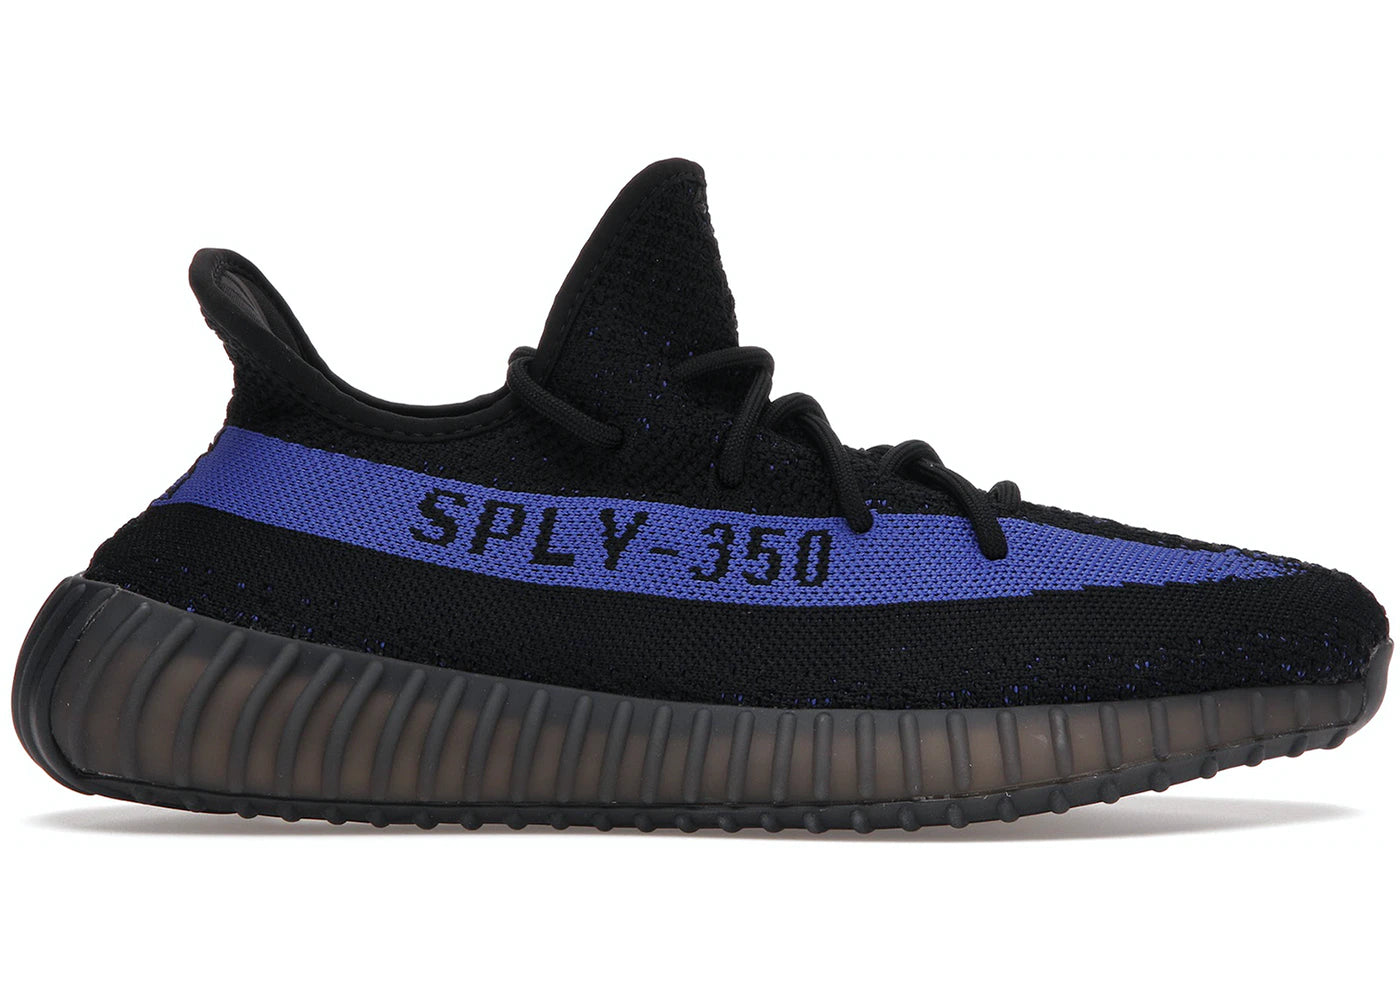 adidas Yeezy Boost 350 V2 Black reflective laces 5.5 M